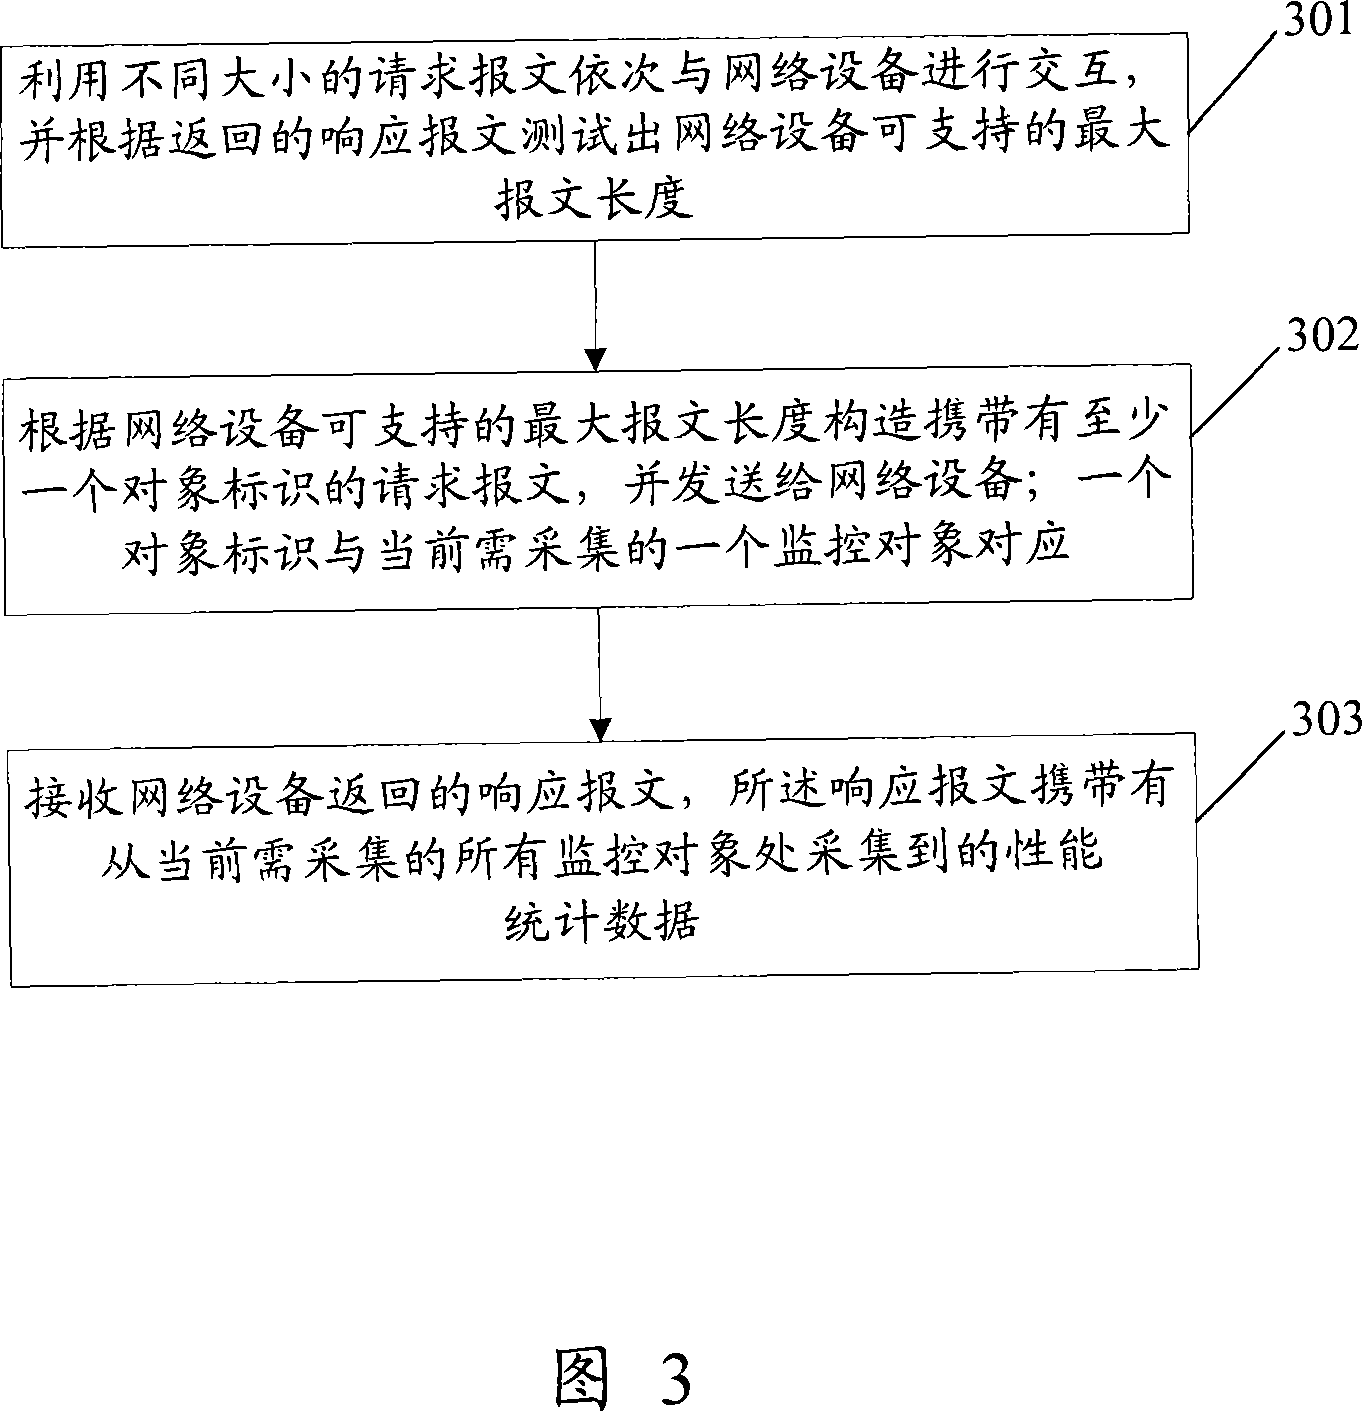 Server and method for collecting performance statistics data of network equipment